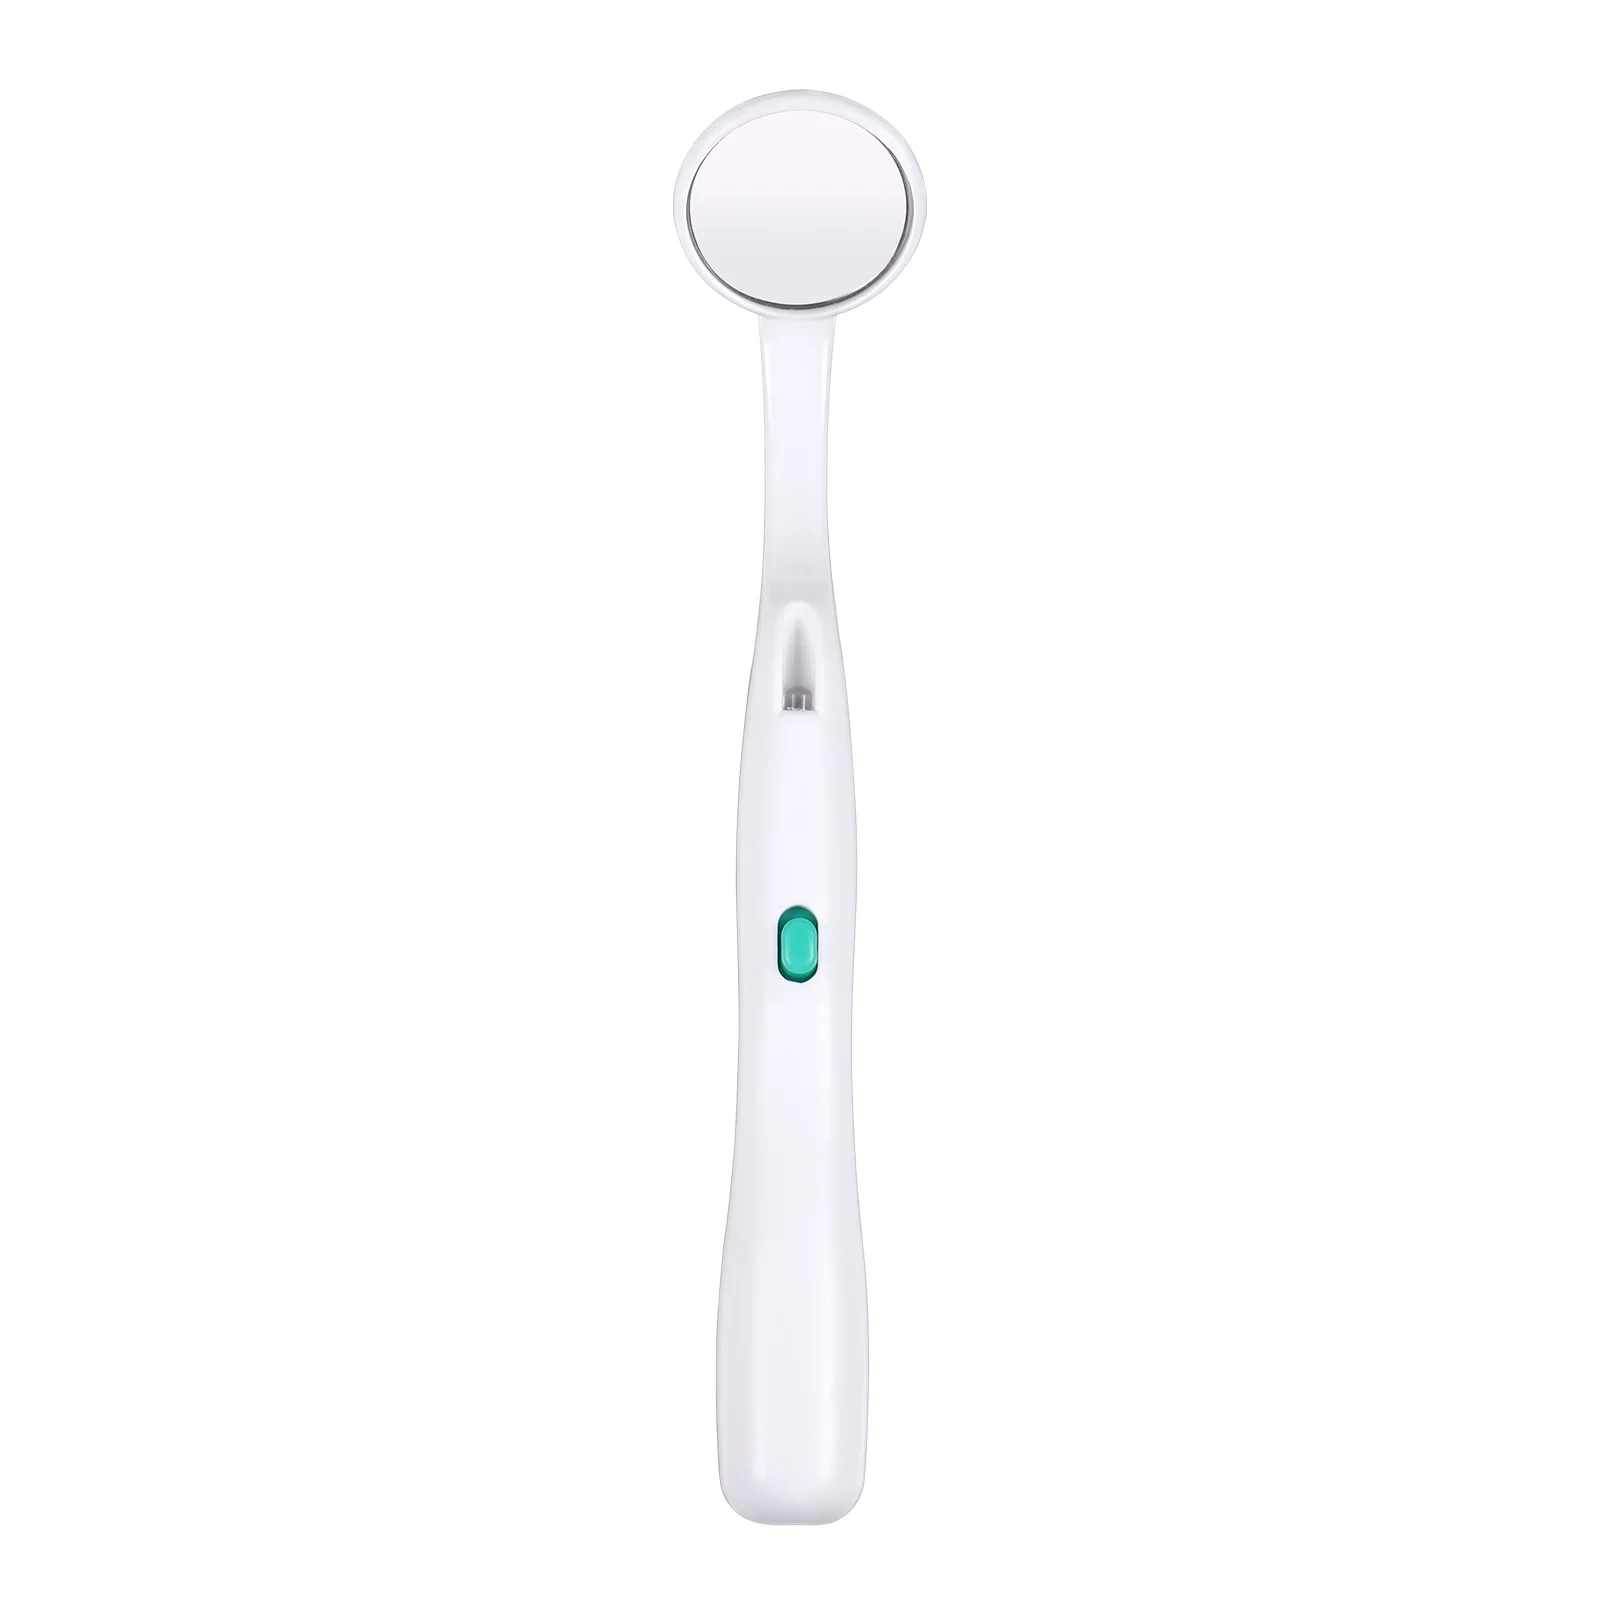 

Mirror Mouth Light Teeth Led Oral Dentist Inspection Anti Fog Lighted Care Tool Angle Curve Use Cleaning Home Tooth Inside Tools